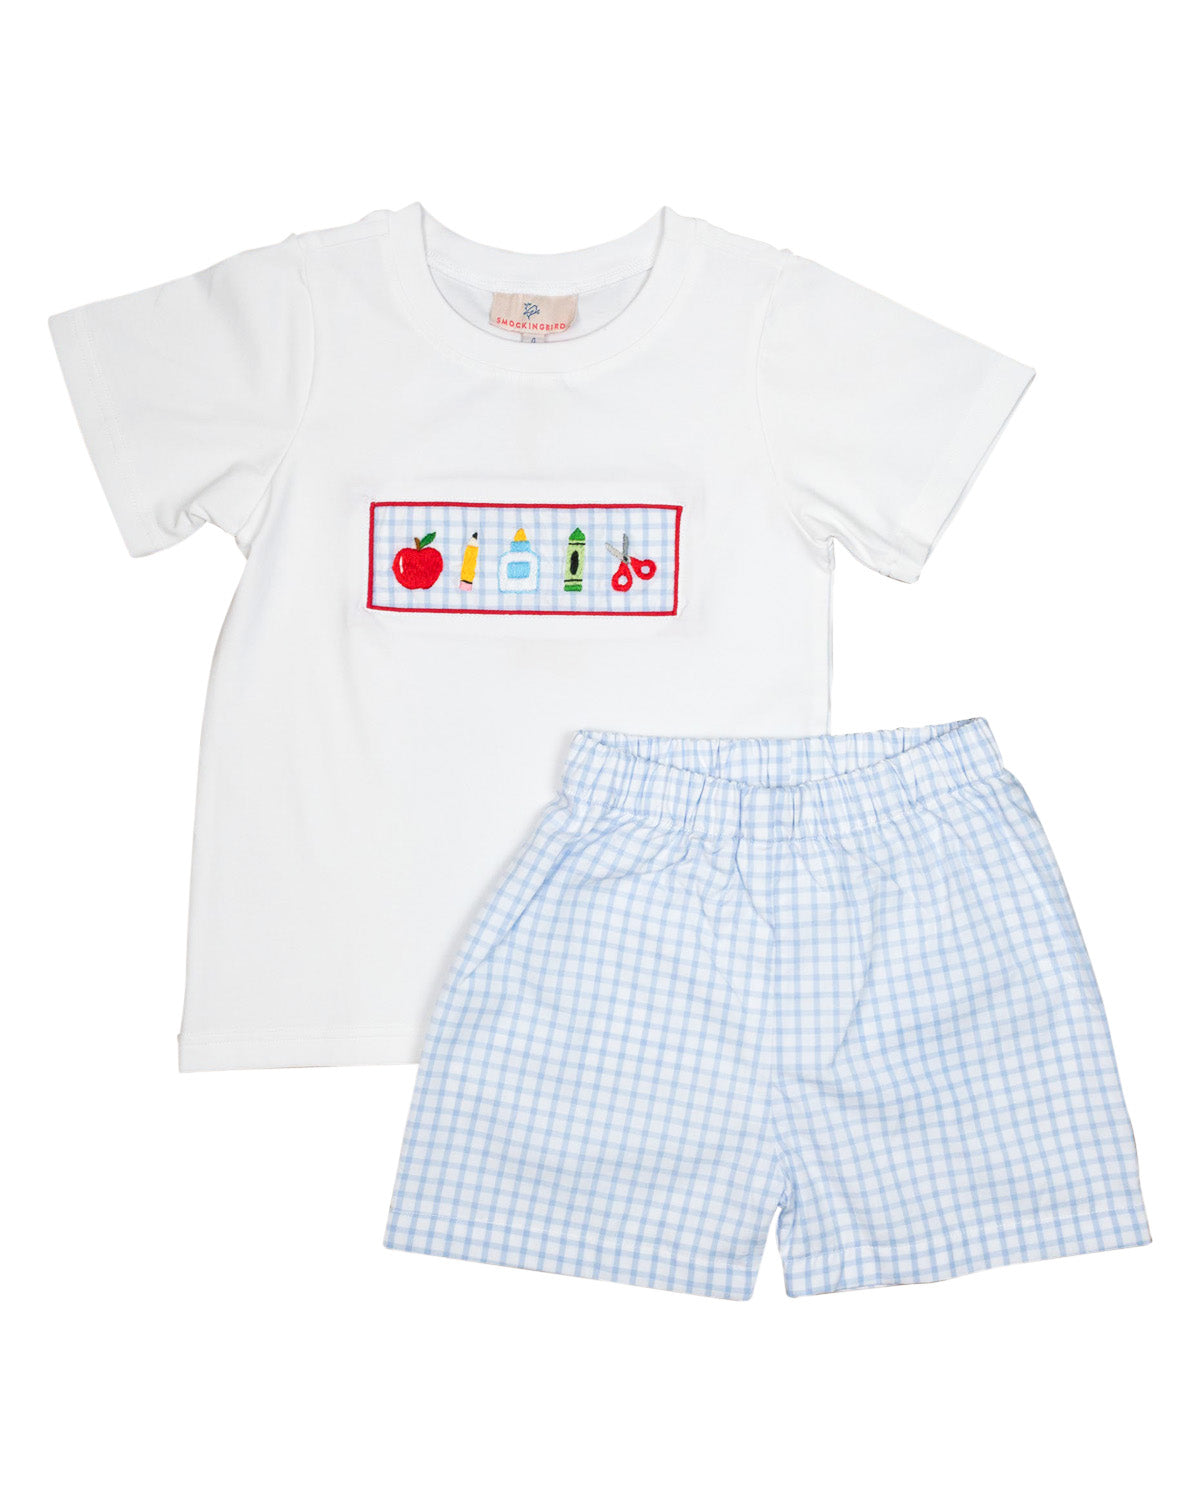 School Supplies Hand Embroidered Shorts Set